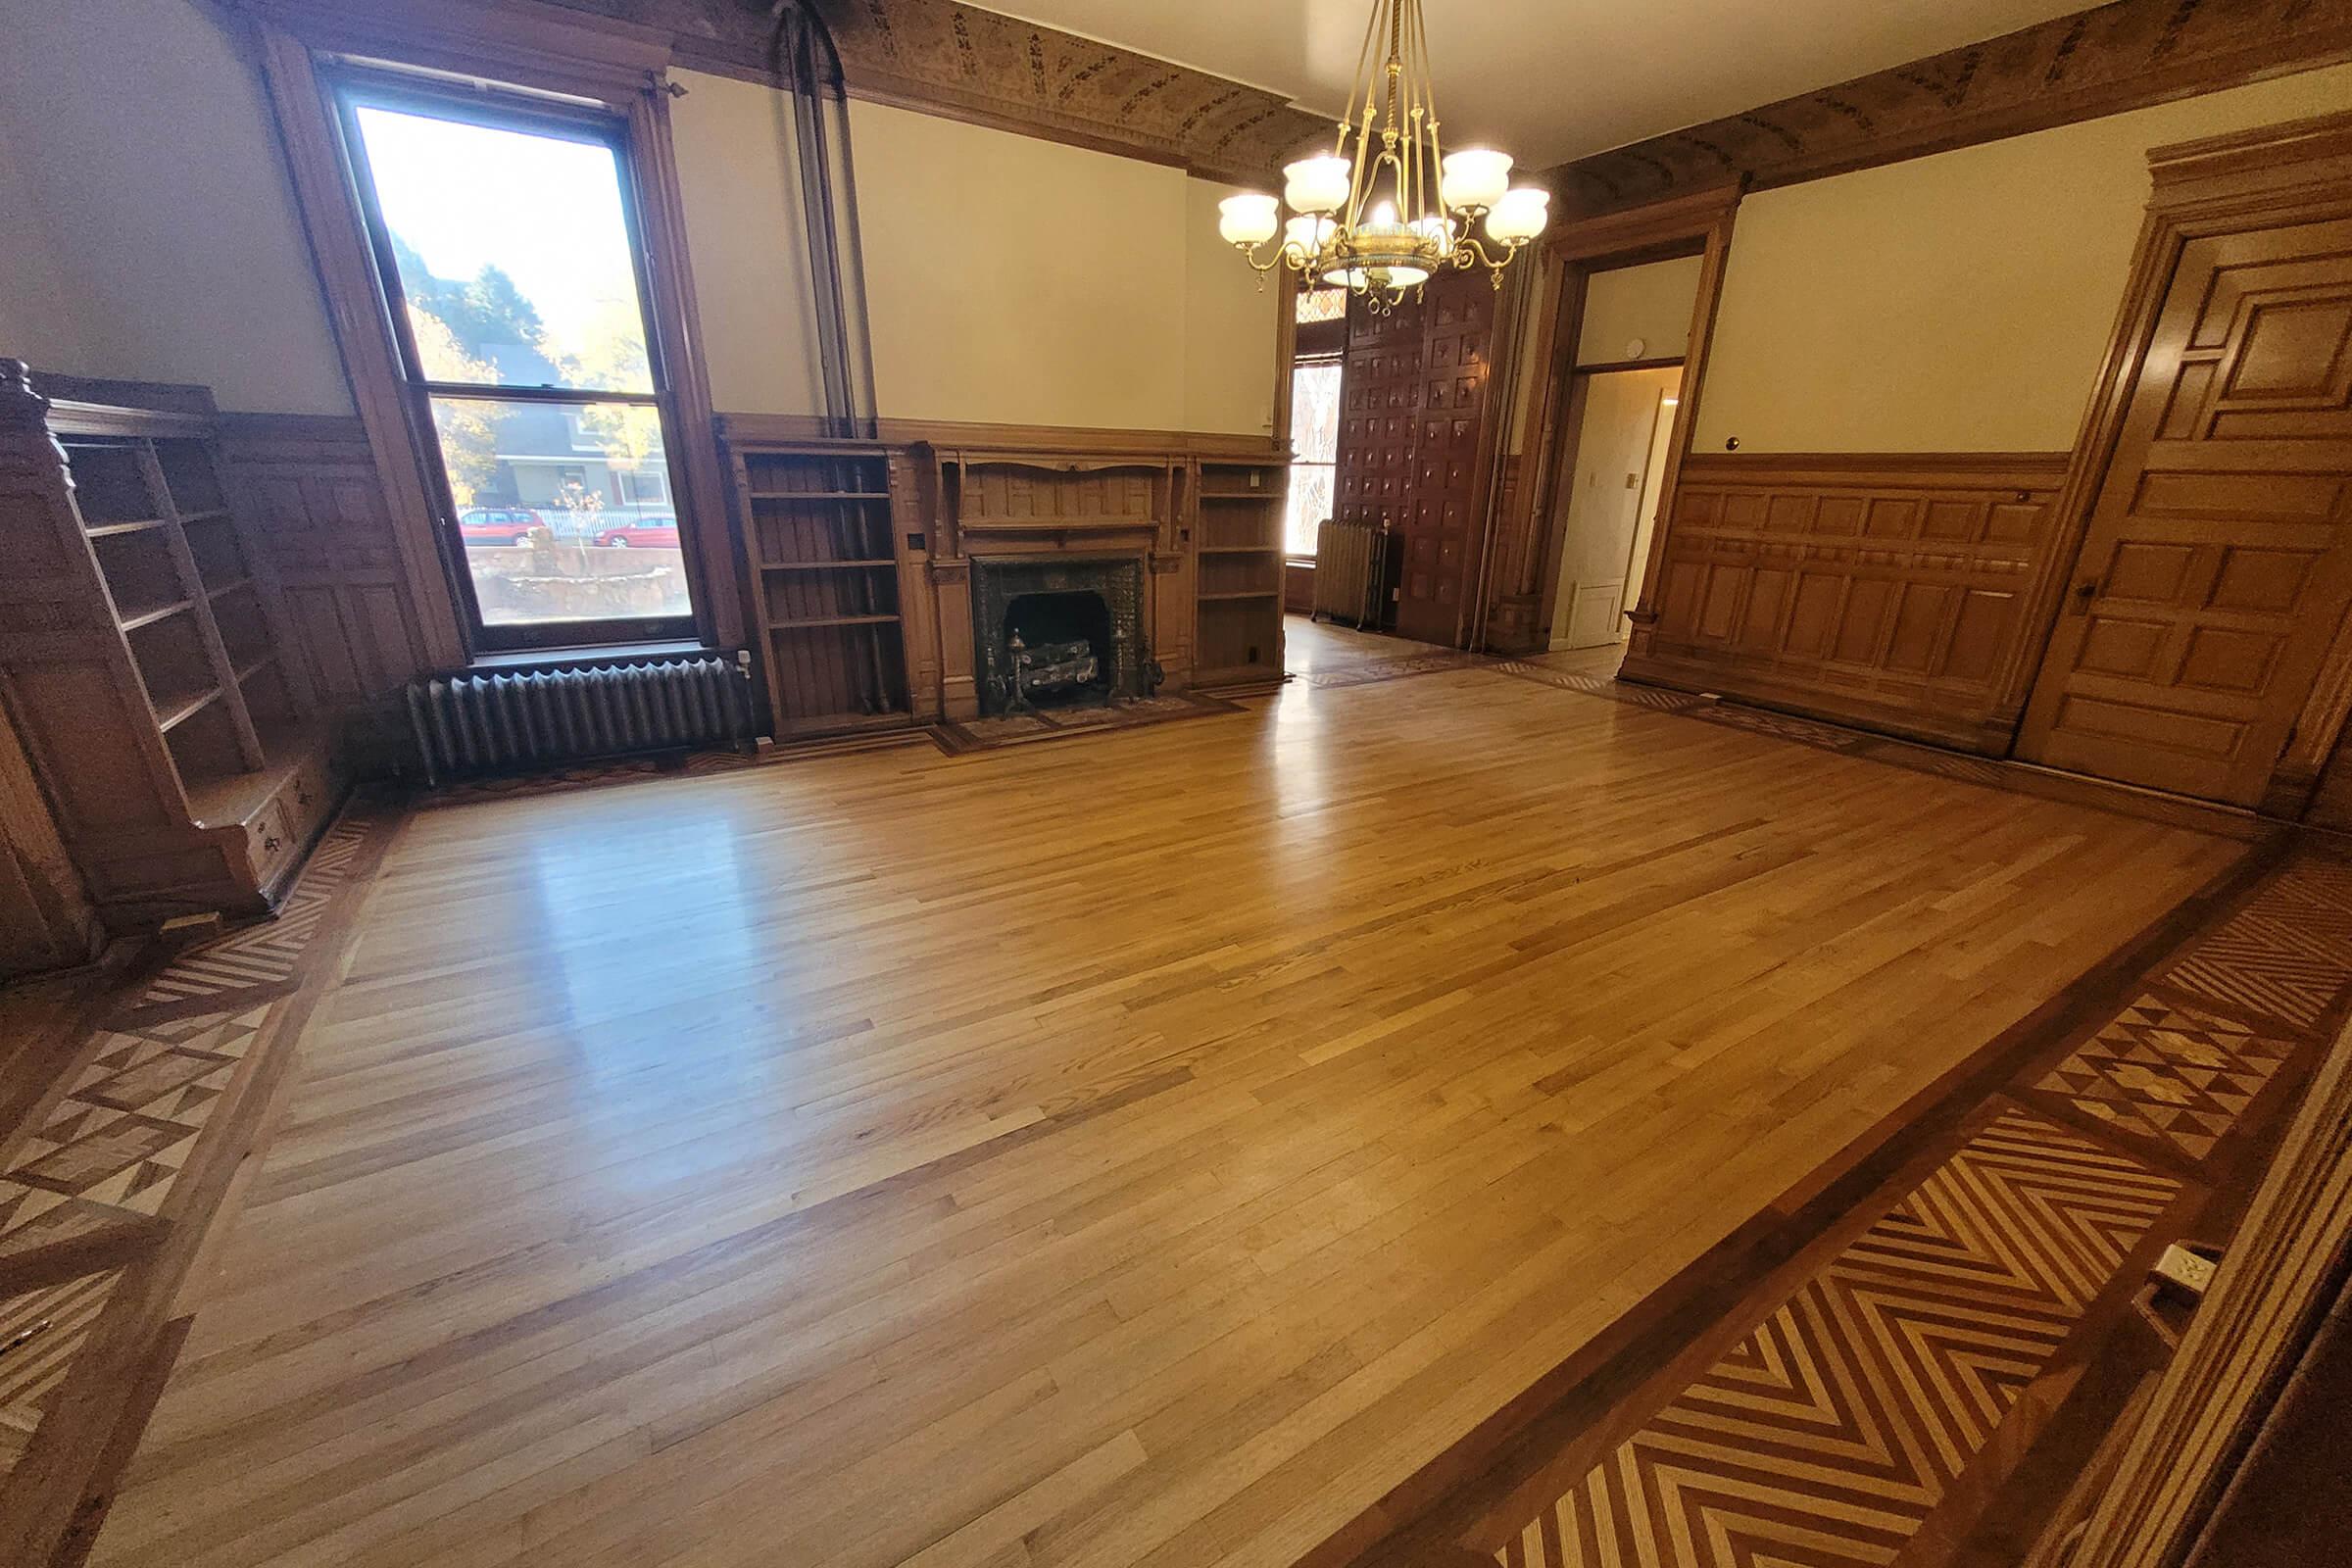 a view of a living room with a wood floor